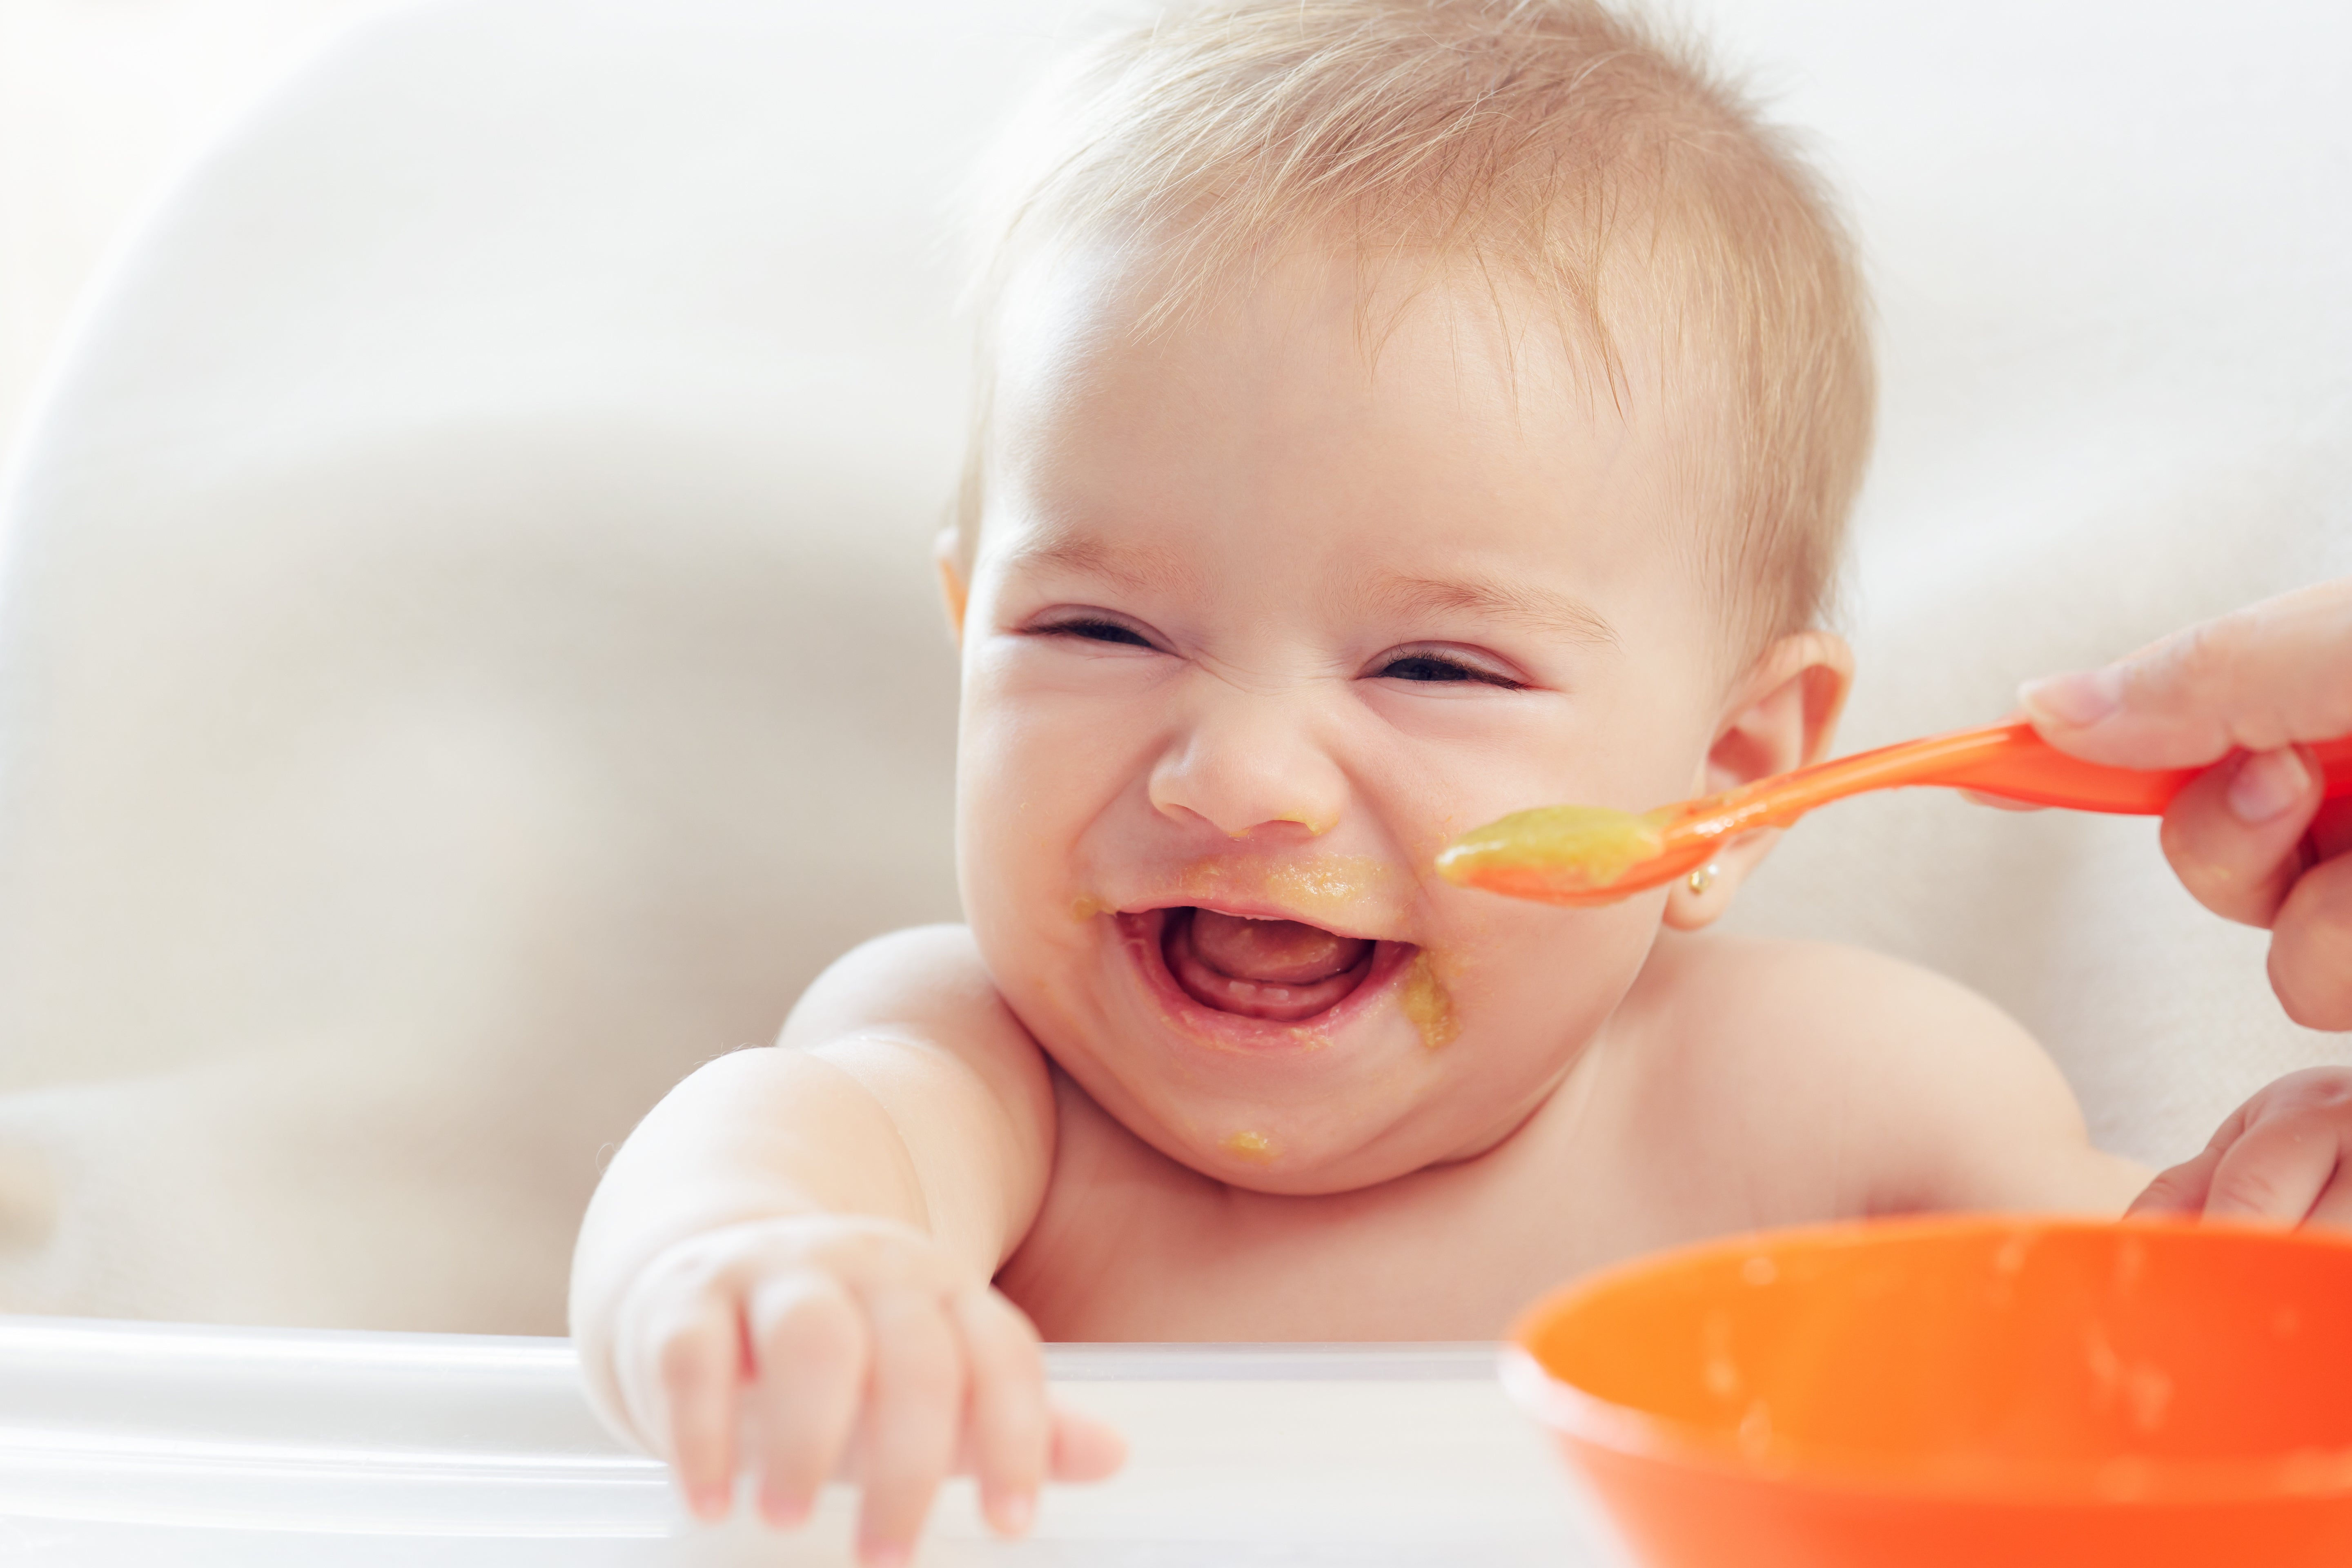 Starting Solids with Your Little One